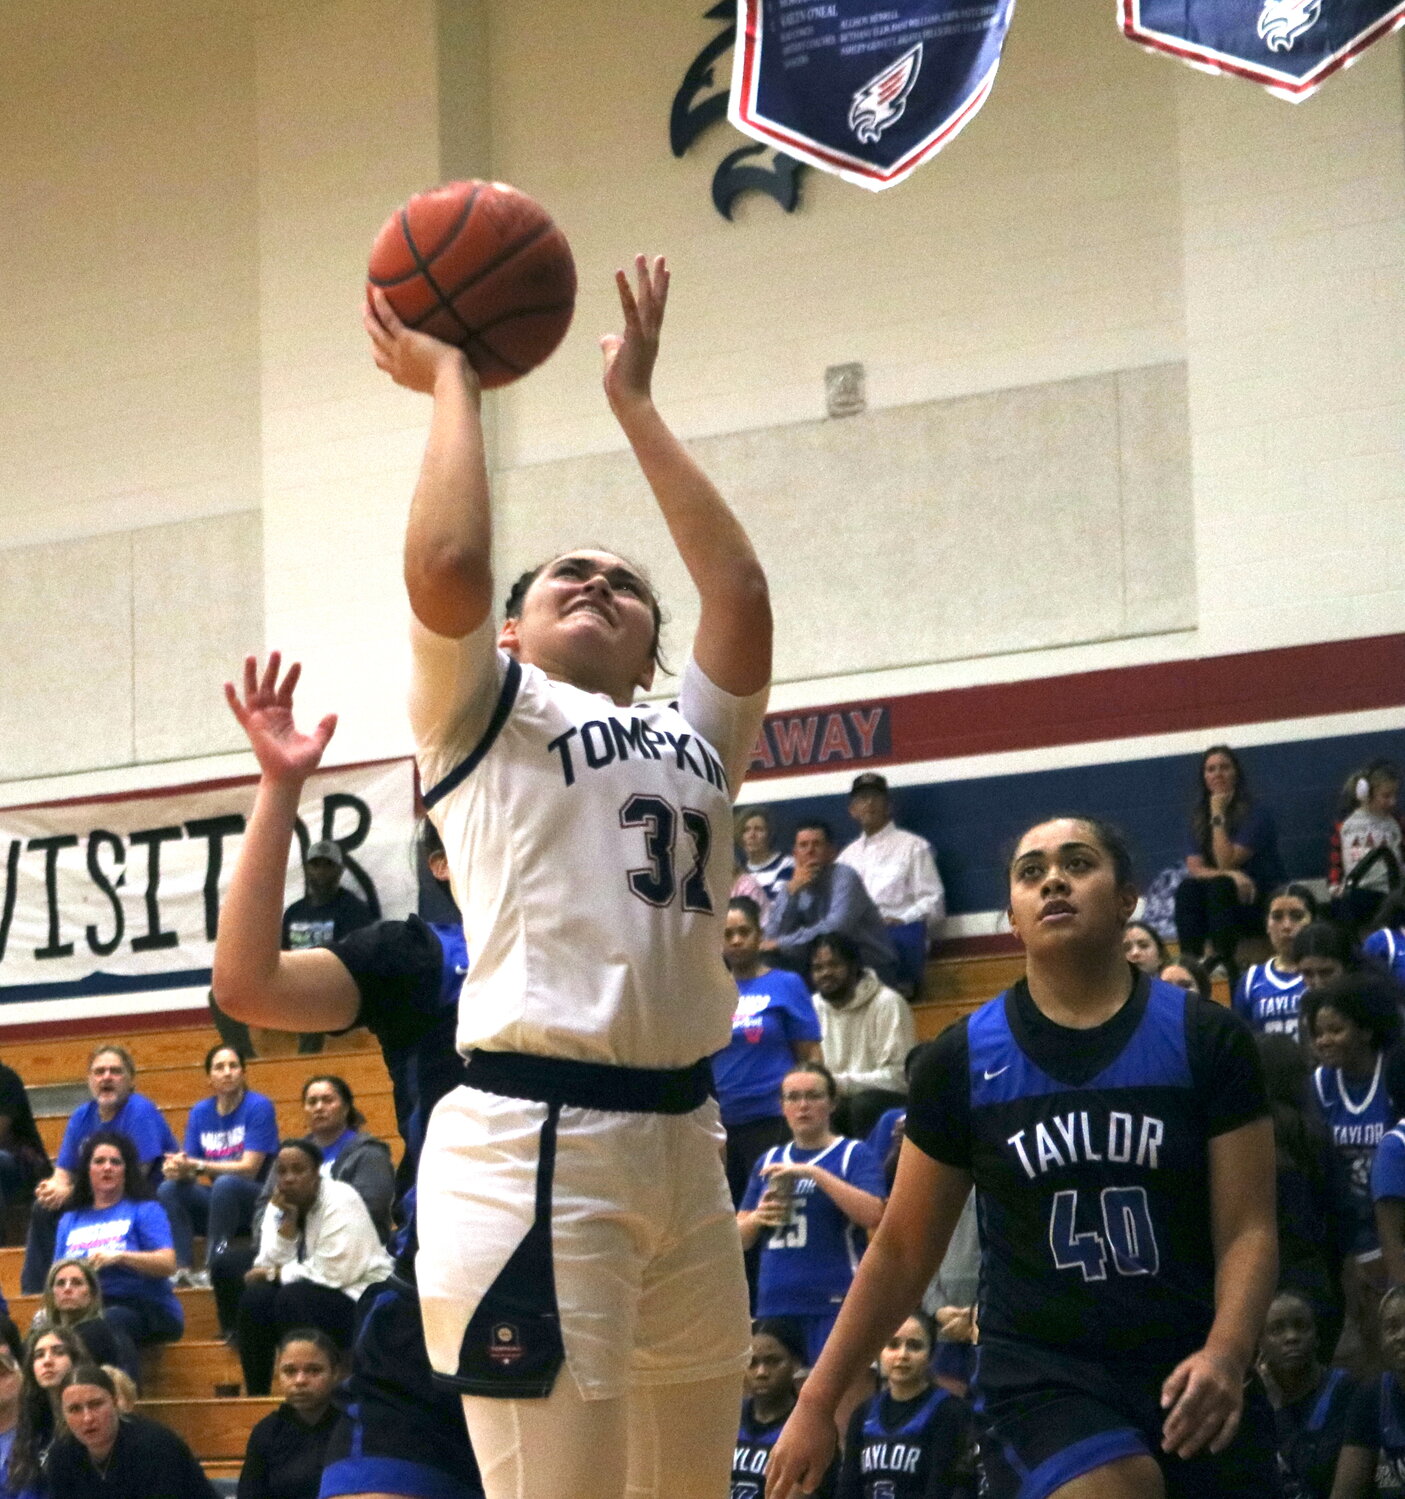 Rihanna DeLeon shoots a layuup during Friday's game between Taylor and Tompkins at the Tompkins gym.